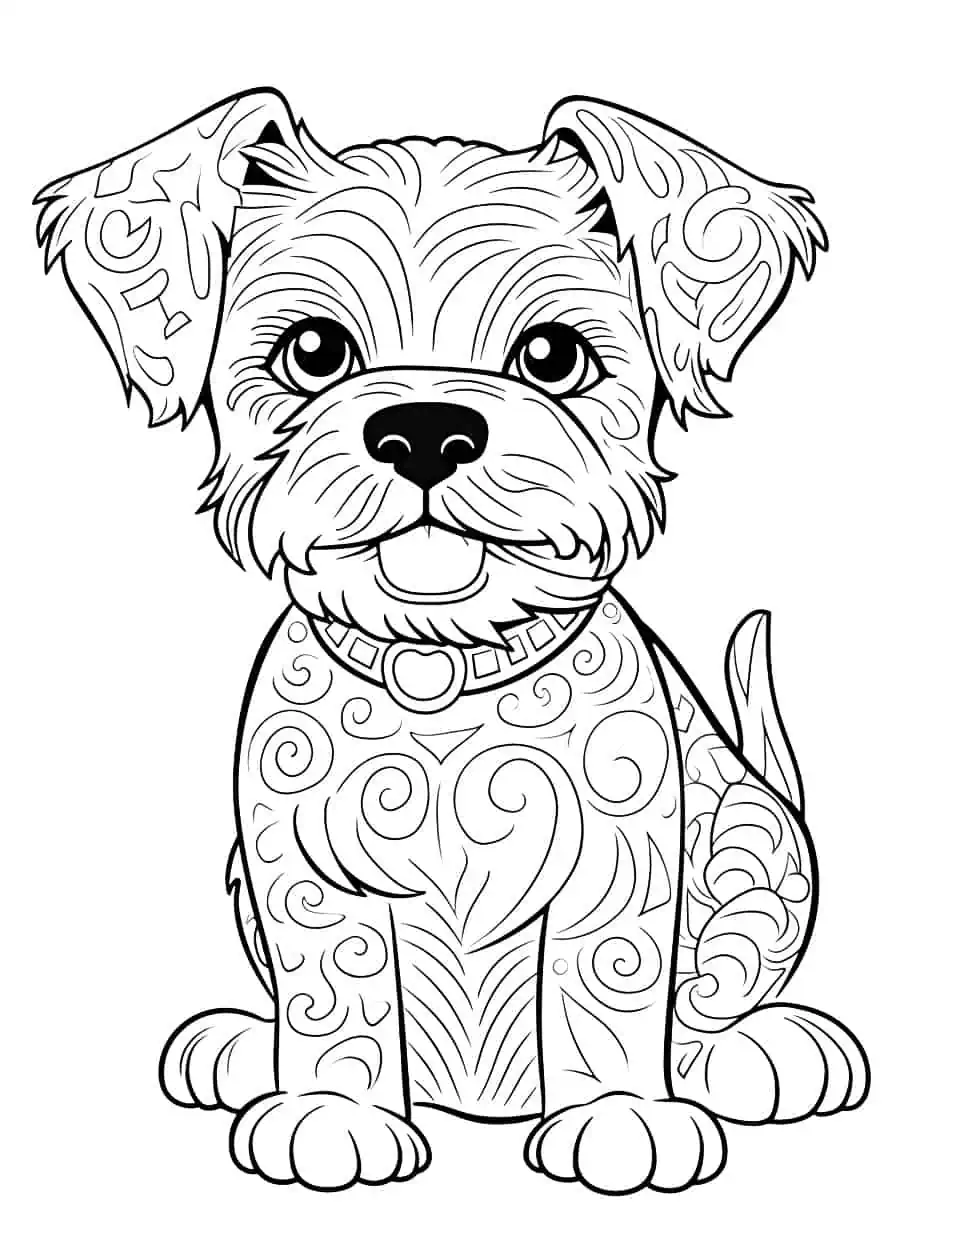 Mandala and Yorkie Mix Coloring Page - A sophisticated Yorkie with a complex mandala design in the background.